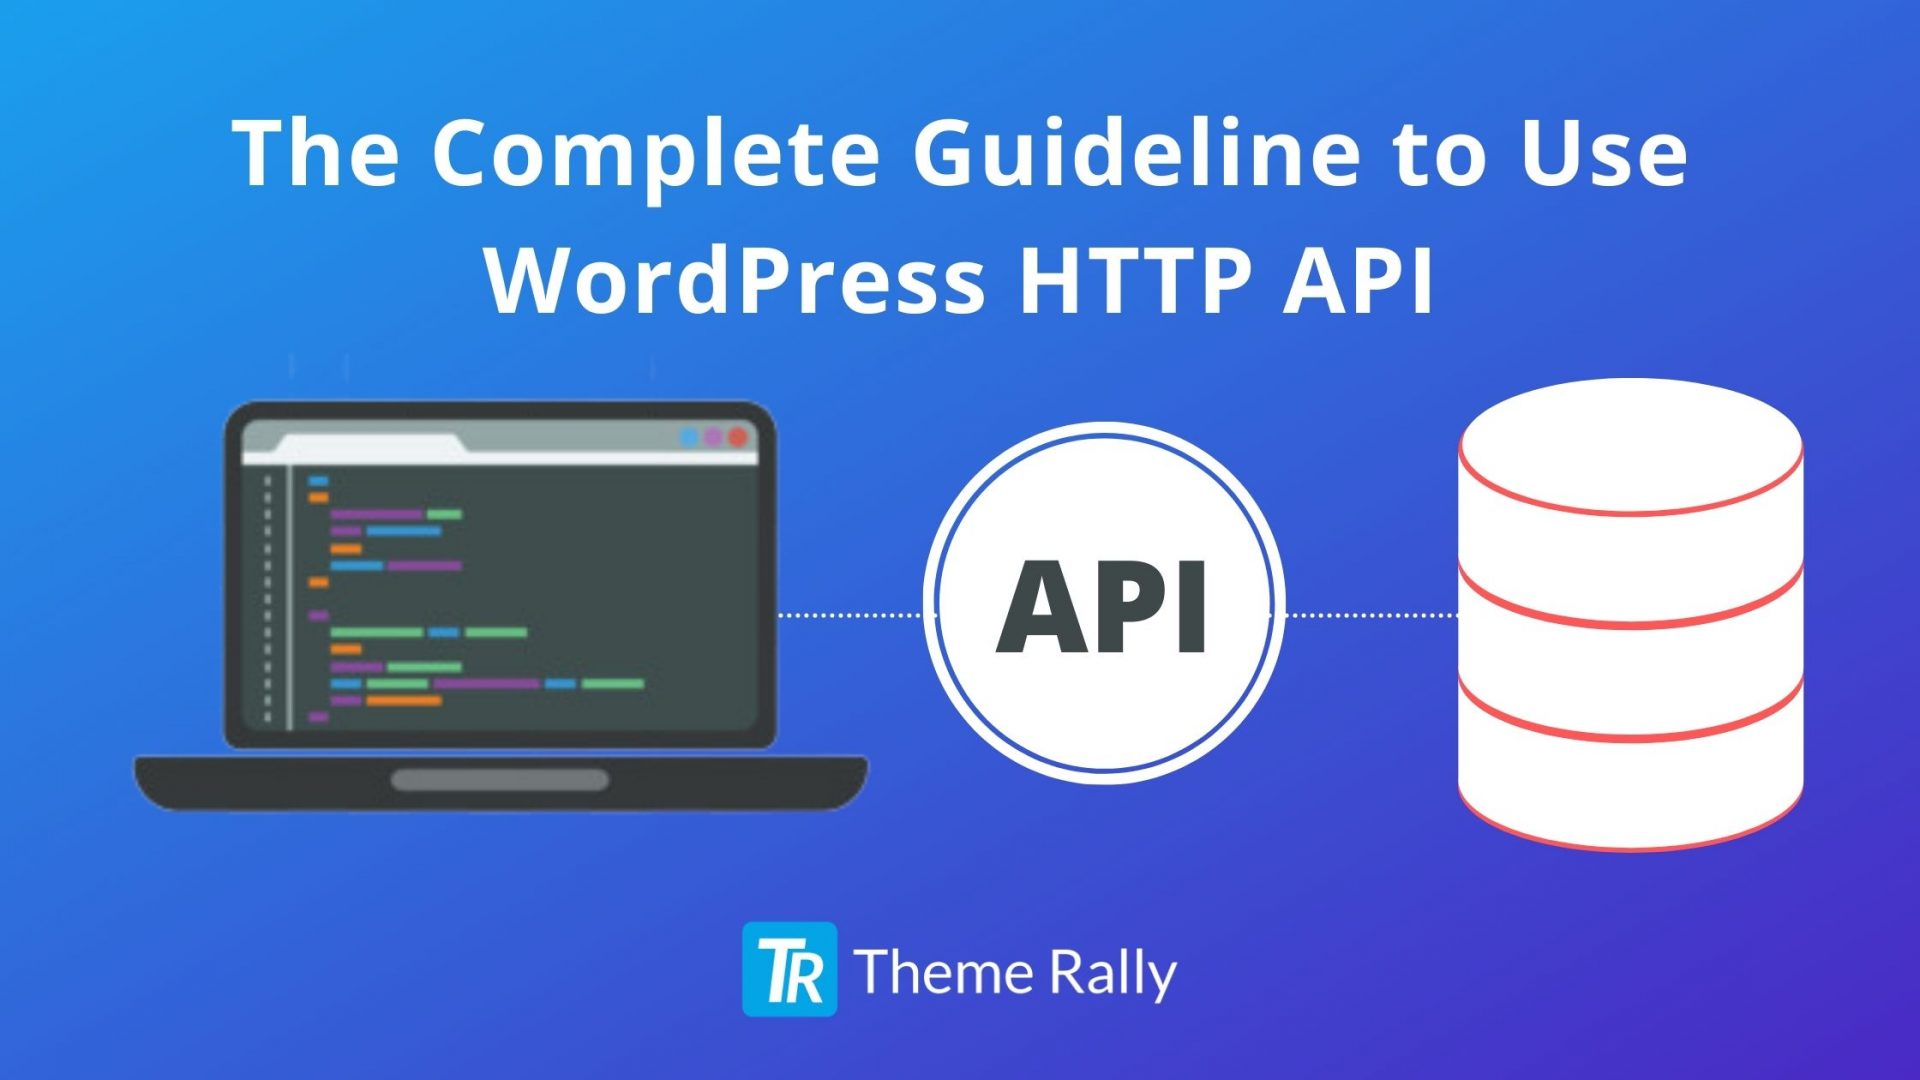 The Complete Guideline to Use WordPress HTTP API